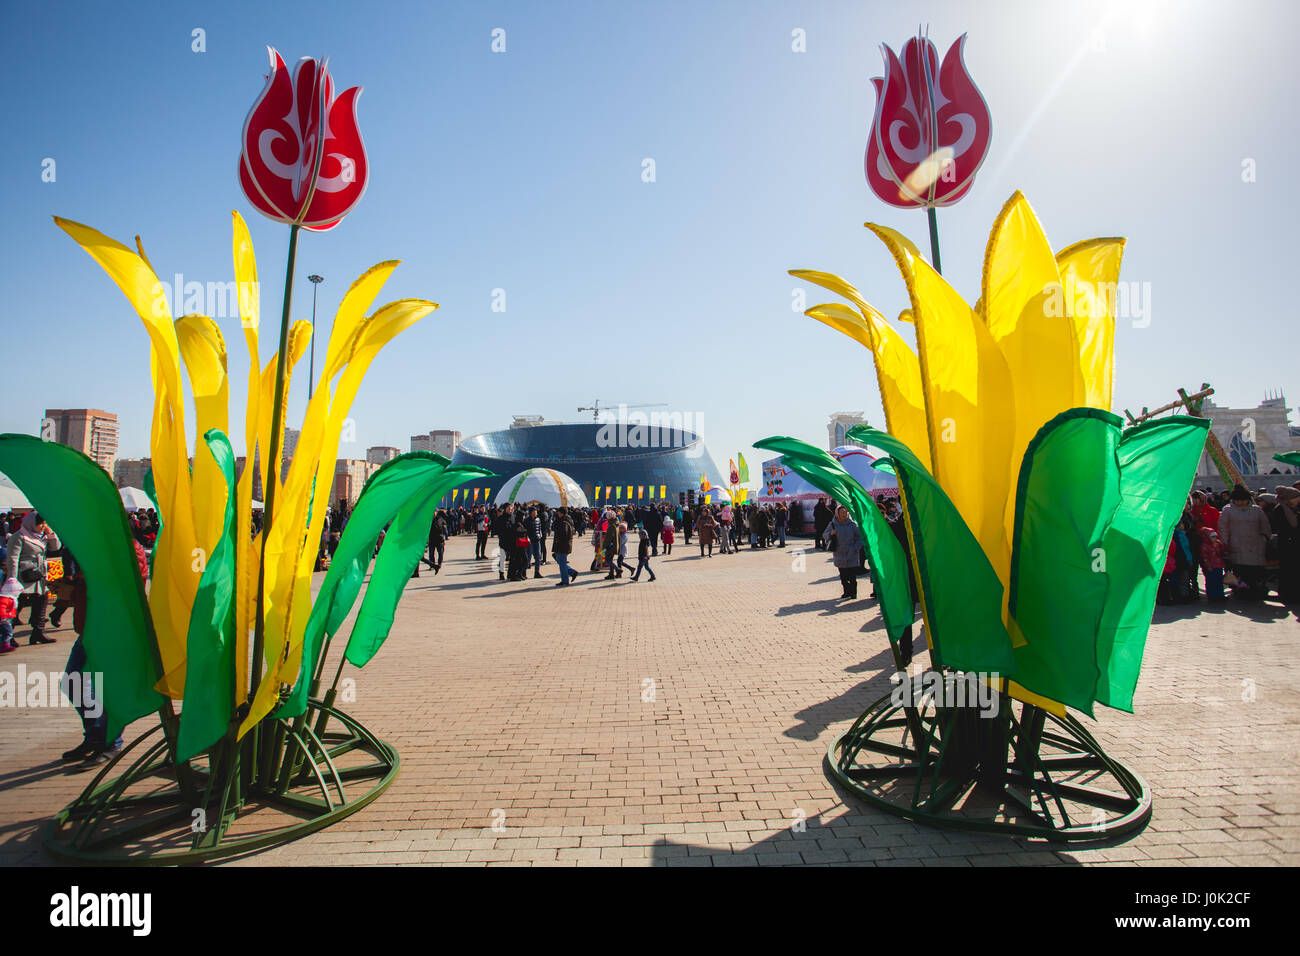 The traditional holiday of Nauryz in Astana on March 22. People are walking on a sunny day. There are concerts and different competitions. Stock Photo